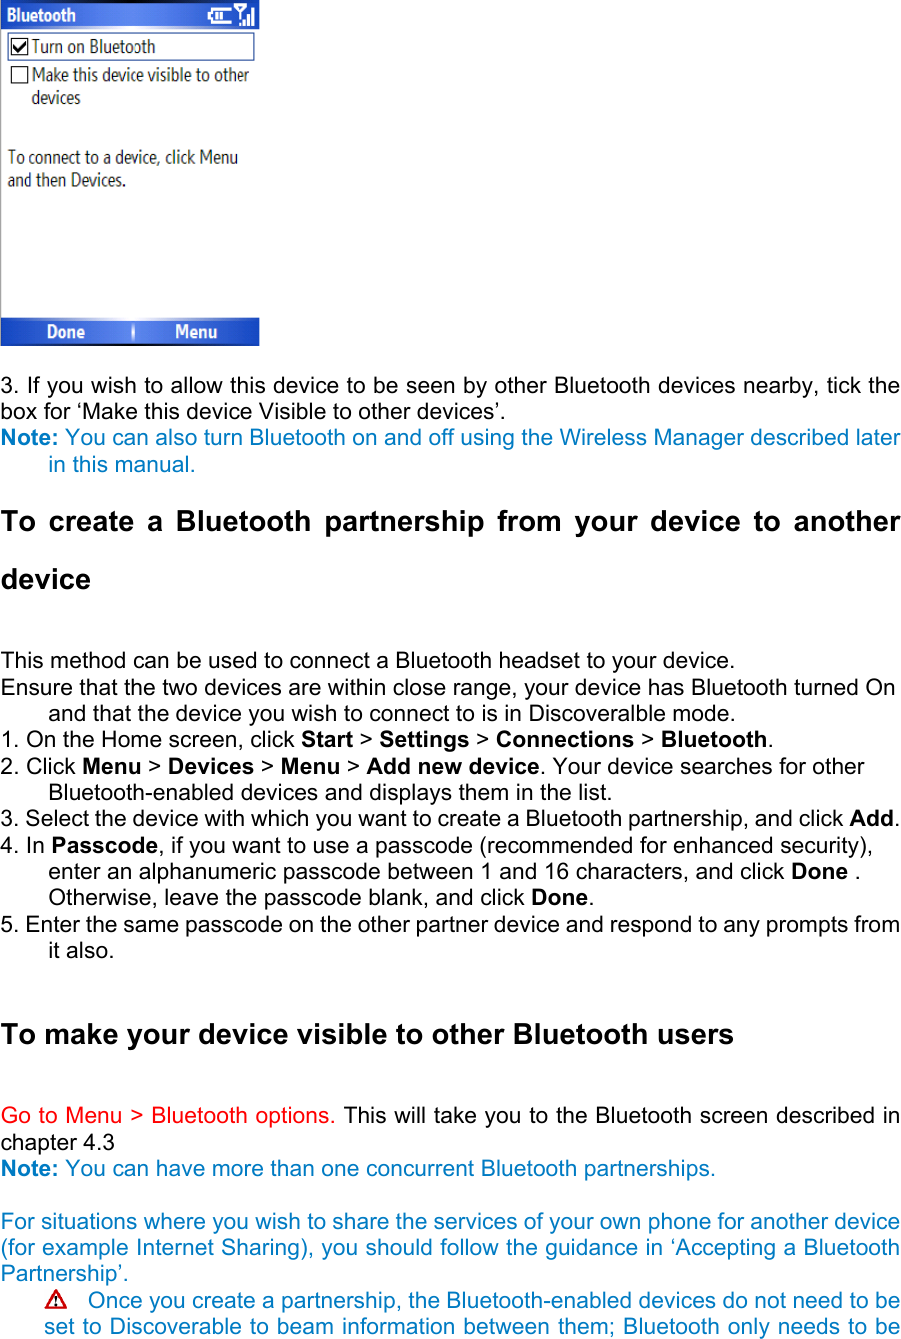   3. If you wish to allow this device to be seen by other Bluetooth devices nearby, tick the box for ‘Make this device Visible to other devices’.   Note: You can also turn Bluetooth on and off using the Wireless Manager described later in this manual. To create a Bluetooth partnership from your device to another device  This method can be used to connect a Bluetooth headset to your device.   Ensure that the two devices are within close range, your device has Bluetooth turned On and that the device you wish to connect to is in Discoveralble mode.   1. On the Home screen, click Start &gt; Settings &gt; Connections &gt; Bluetooth. 2. Click Menu &gt; Devices &gt; Menu &gt; Add new device. Your device searches for other Bluetooth-enabled devices and displays them in the list.   3. Select the device with which you want to create a Bluetooth partnership, and click Add.  4. In Passcode, if you want to use a passcode (recommended for enhanced security), enter an alphanumeric passcode between 1 and 16 characters, and click Done . Otherwise, leave the passcode blank, and click Done.  5. Enter the same passcode on the other partner device and respond to any prompts from it also.  To make your device visible to other Bluetooth users   Go to Menu &gt; Bluetooth options. This will take you to the Bluetooth screen described in chapter 4.3 Note: You can have more than one concurrent Bluetooth partnerships.  For situations where you wish to share the services of your own phone for another device (for example Internet Sharing), you should follow the guidance in ‘Accepting a Bluetooth Partnership’.   Once you create a partnership, the Bluetooth-enabled devices do not need to be set to Discoverable to beam information between them; Bluetooth only needs to be 